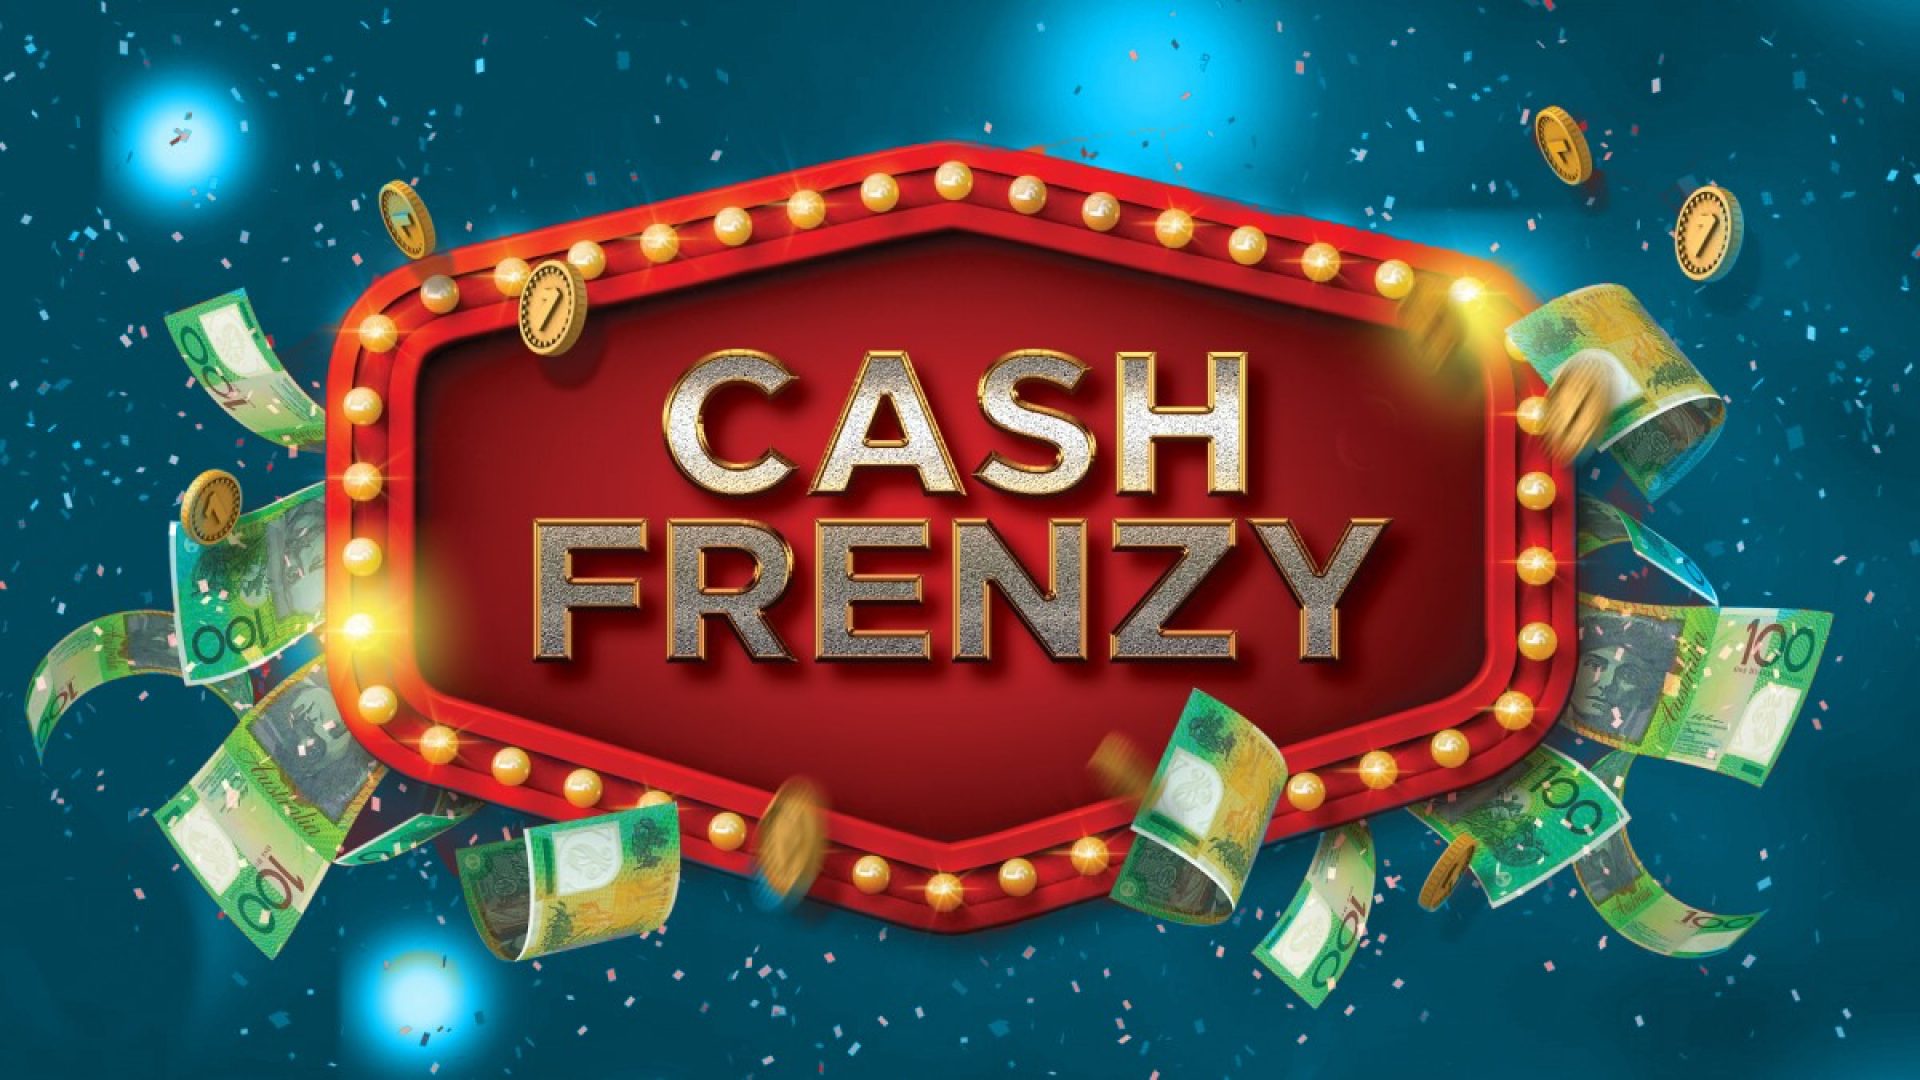 Cash Frenzy, an Online Slot Game Made by Spinx Games Limited I Gle